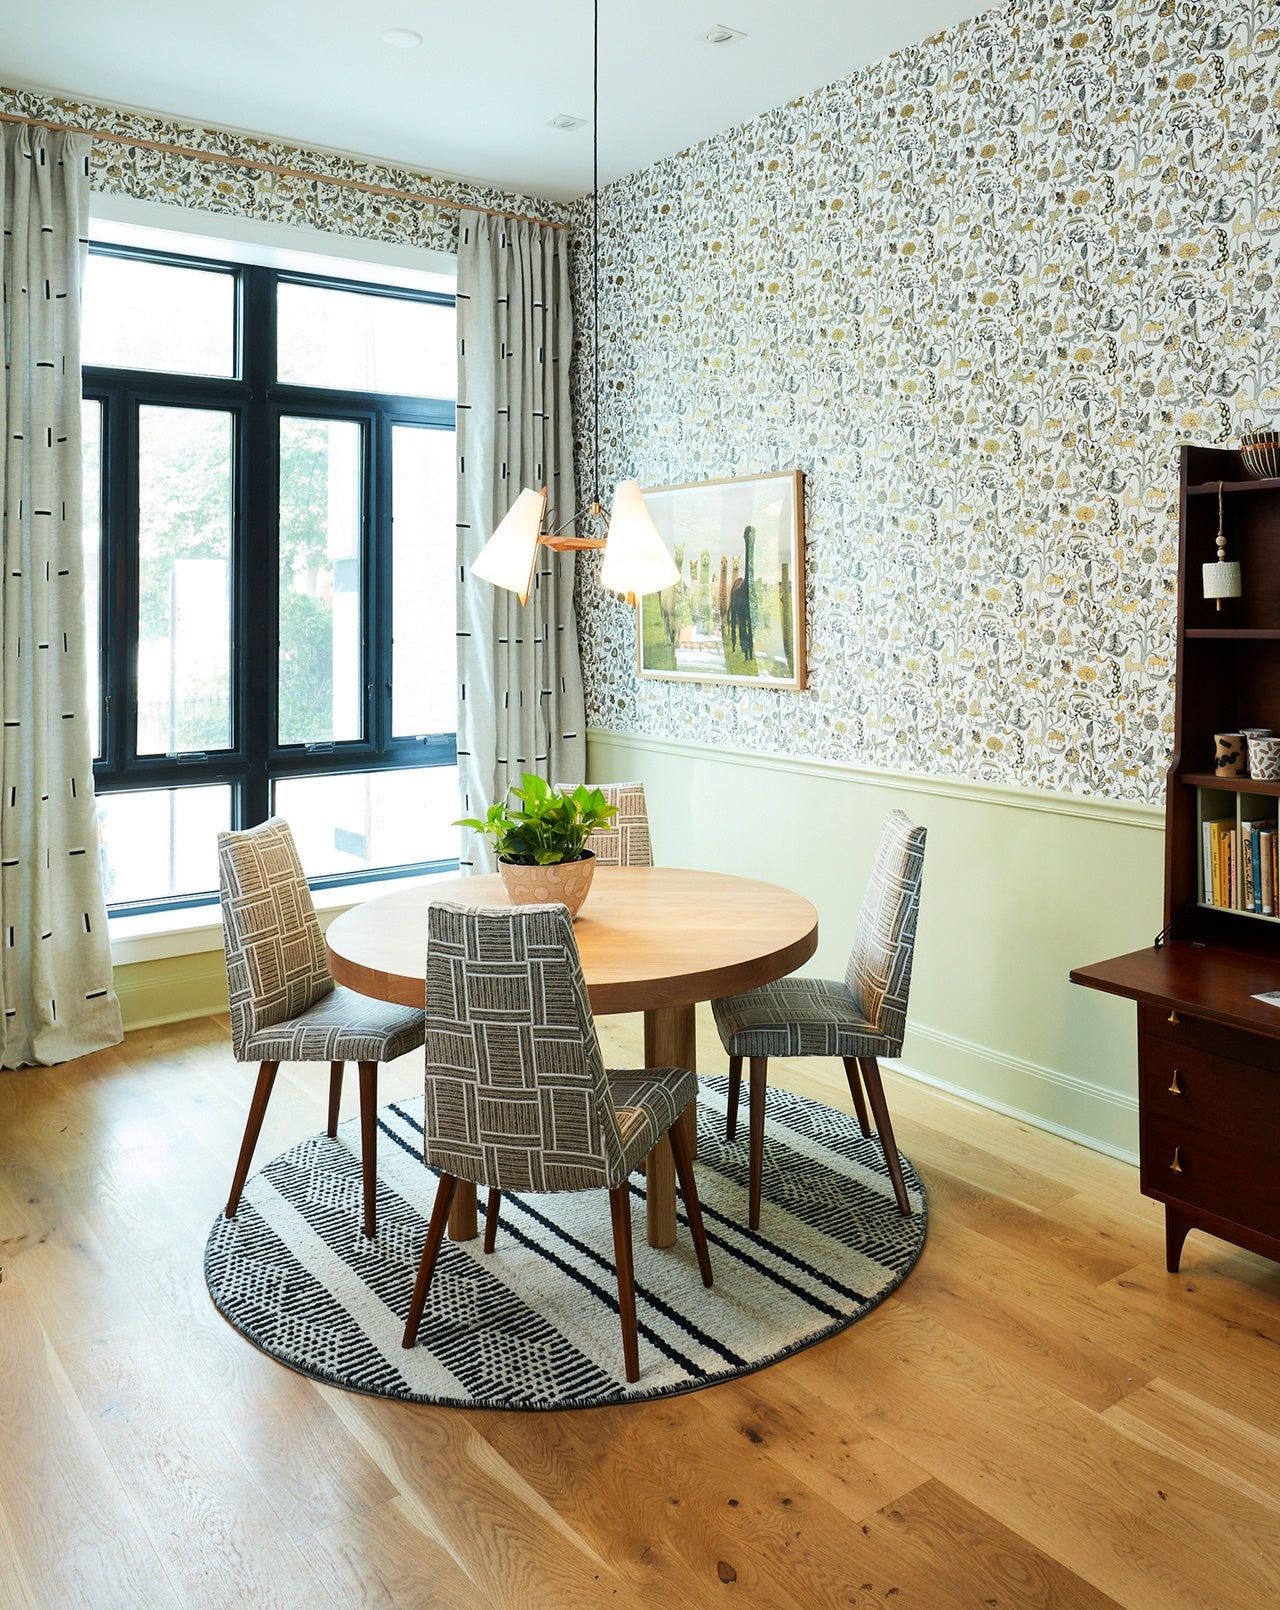 H&W inside the 2019 real simple home | Foret Gold wallpaper | Julia Rothman | Hygge & West